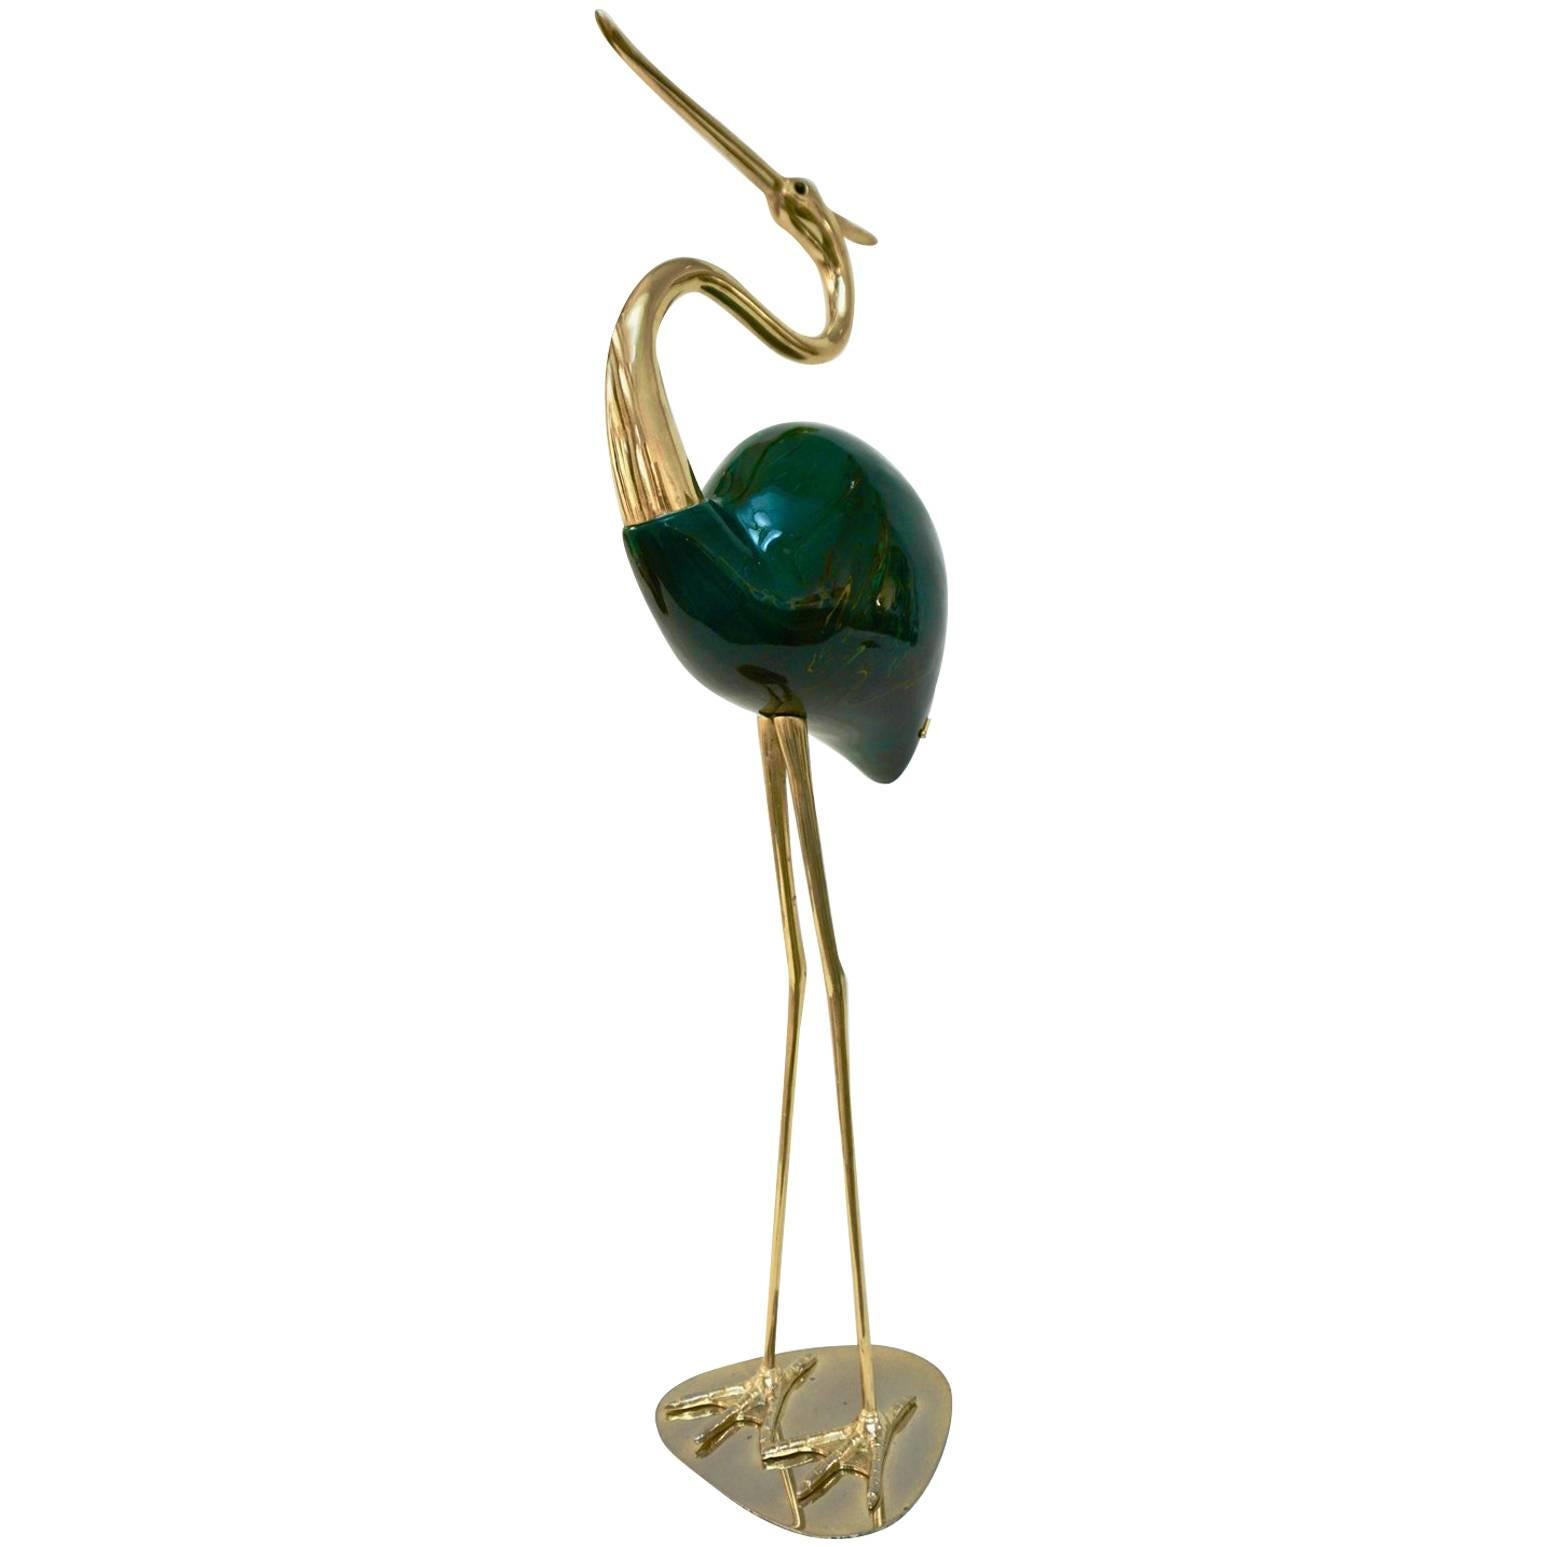 Rare organic sculptural work signed by the Italian architect Alessandro Petti, 1960s, in brass with hand-carved wood body decorated and hand enameled in trompe-l'oeil to resemble green agate.
Can be complemented with a smaller flamingo bird, our